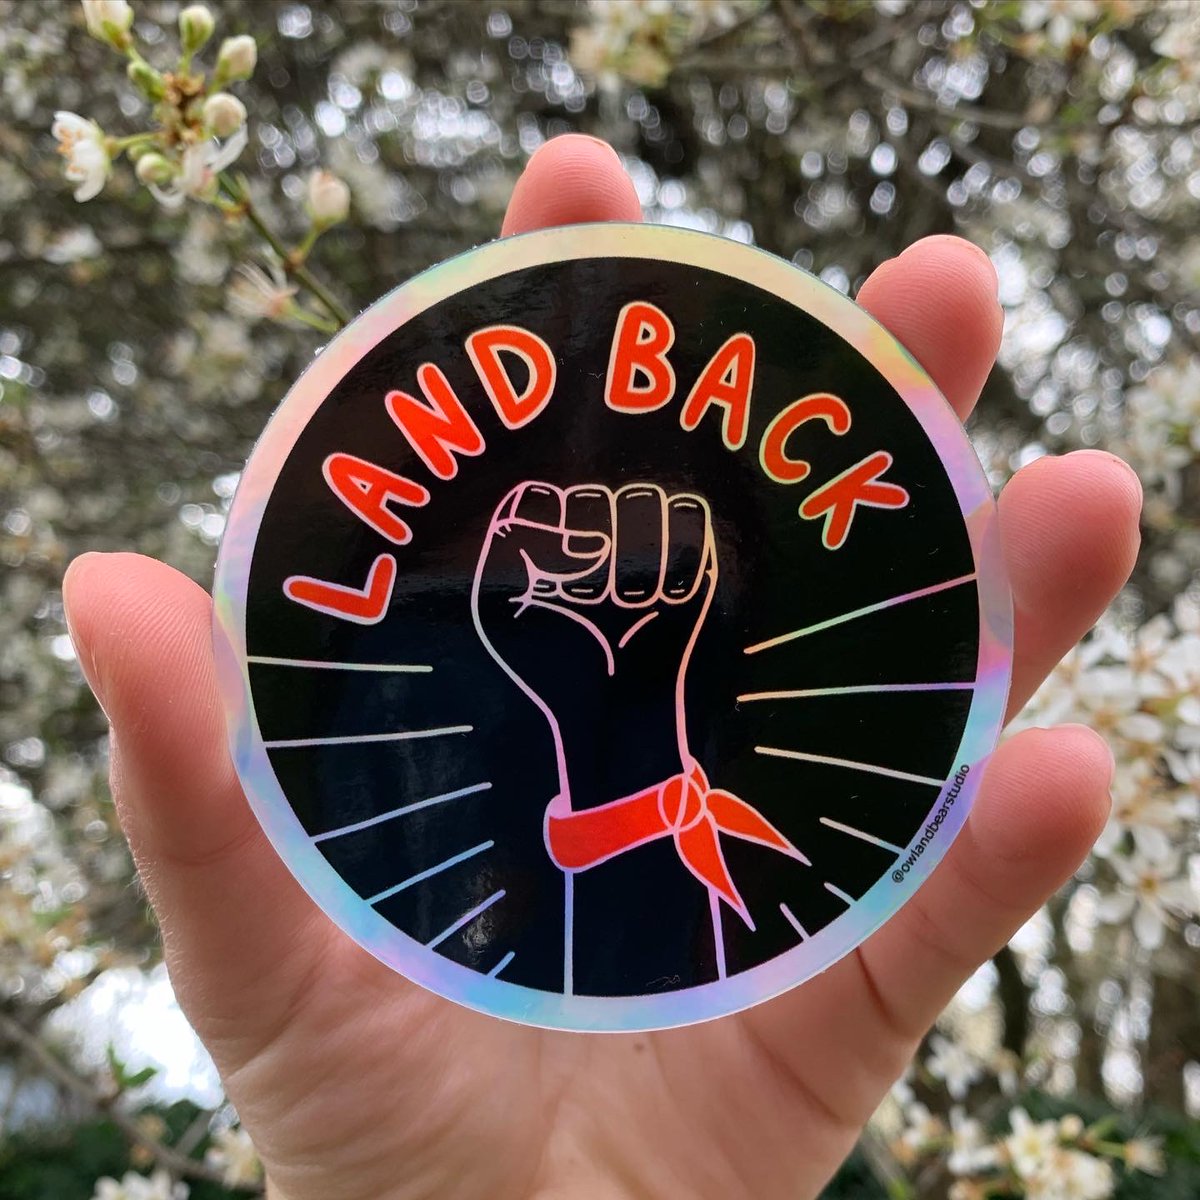 New Stickers!! ✊ 100% of profits go to the Unist’ot’en Legal Fund! #WetsuwetenStrong

Holographic & so shiny! Waterproof & weatherproof so you can stick them anywhere. Stand up for Indigenous Rights!

Shop: conservationphotos.etsy.com

#Wetsuweten #LandBack #unistoten #Stickers